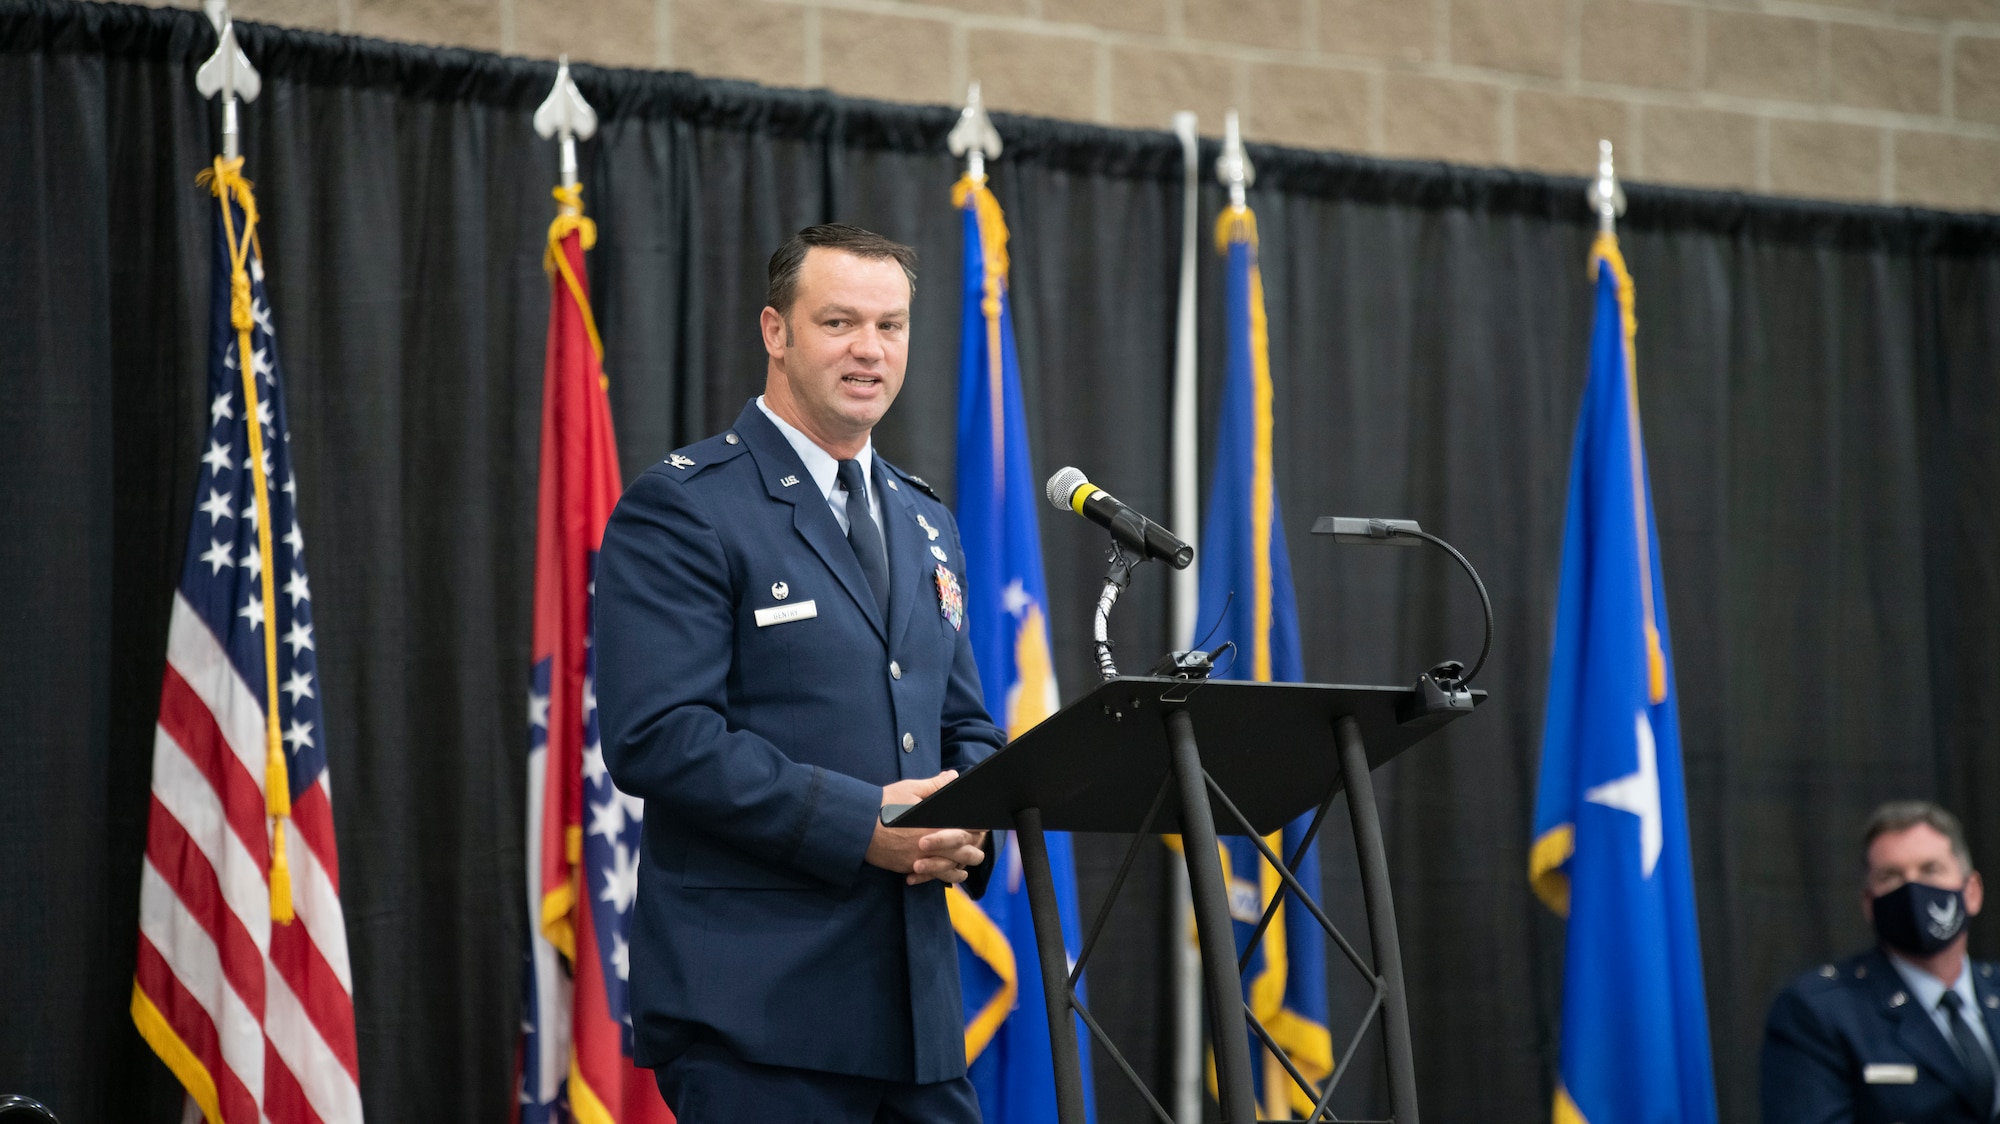 Col. Jeremiah Gentry addresses the audience at a 188th Wing change of command ceremony, Aug 7, 2021.